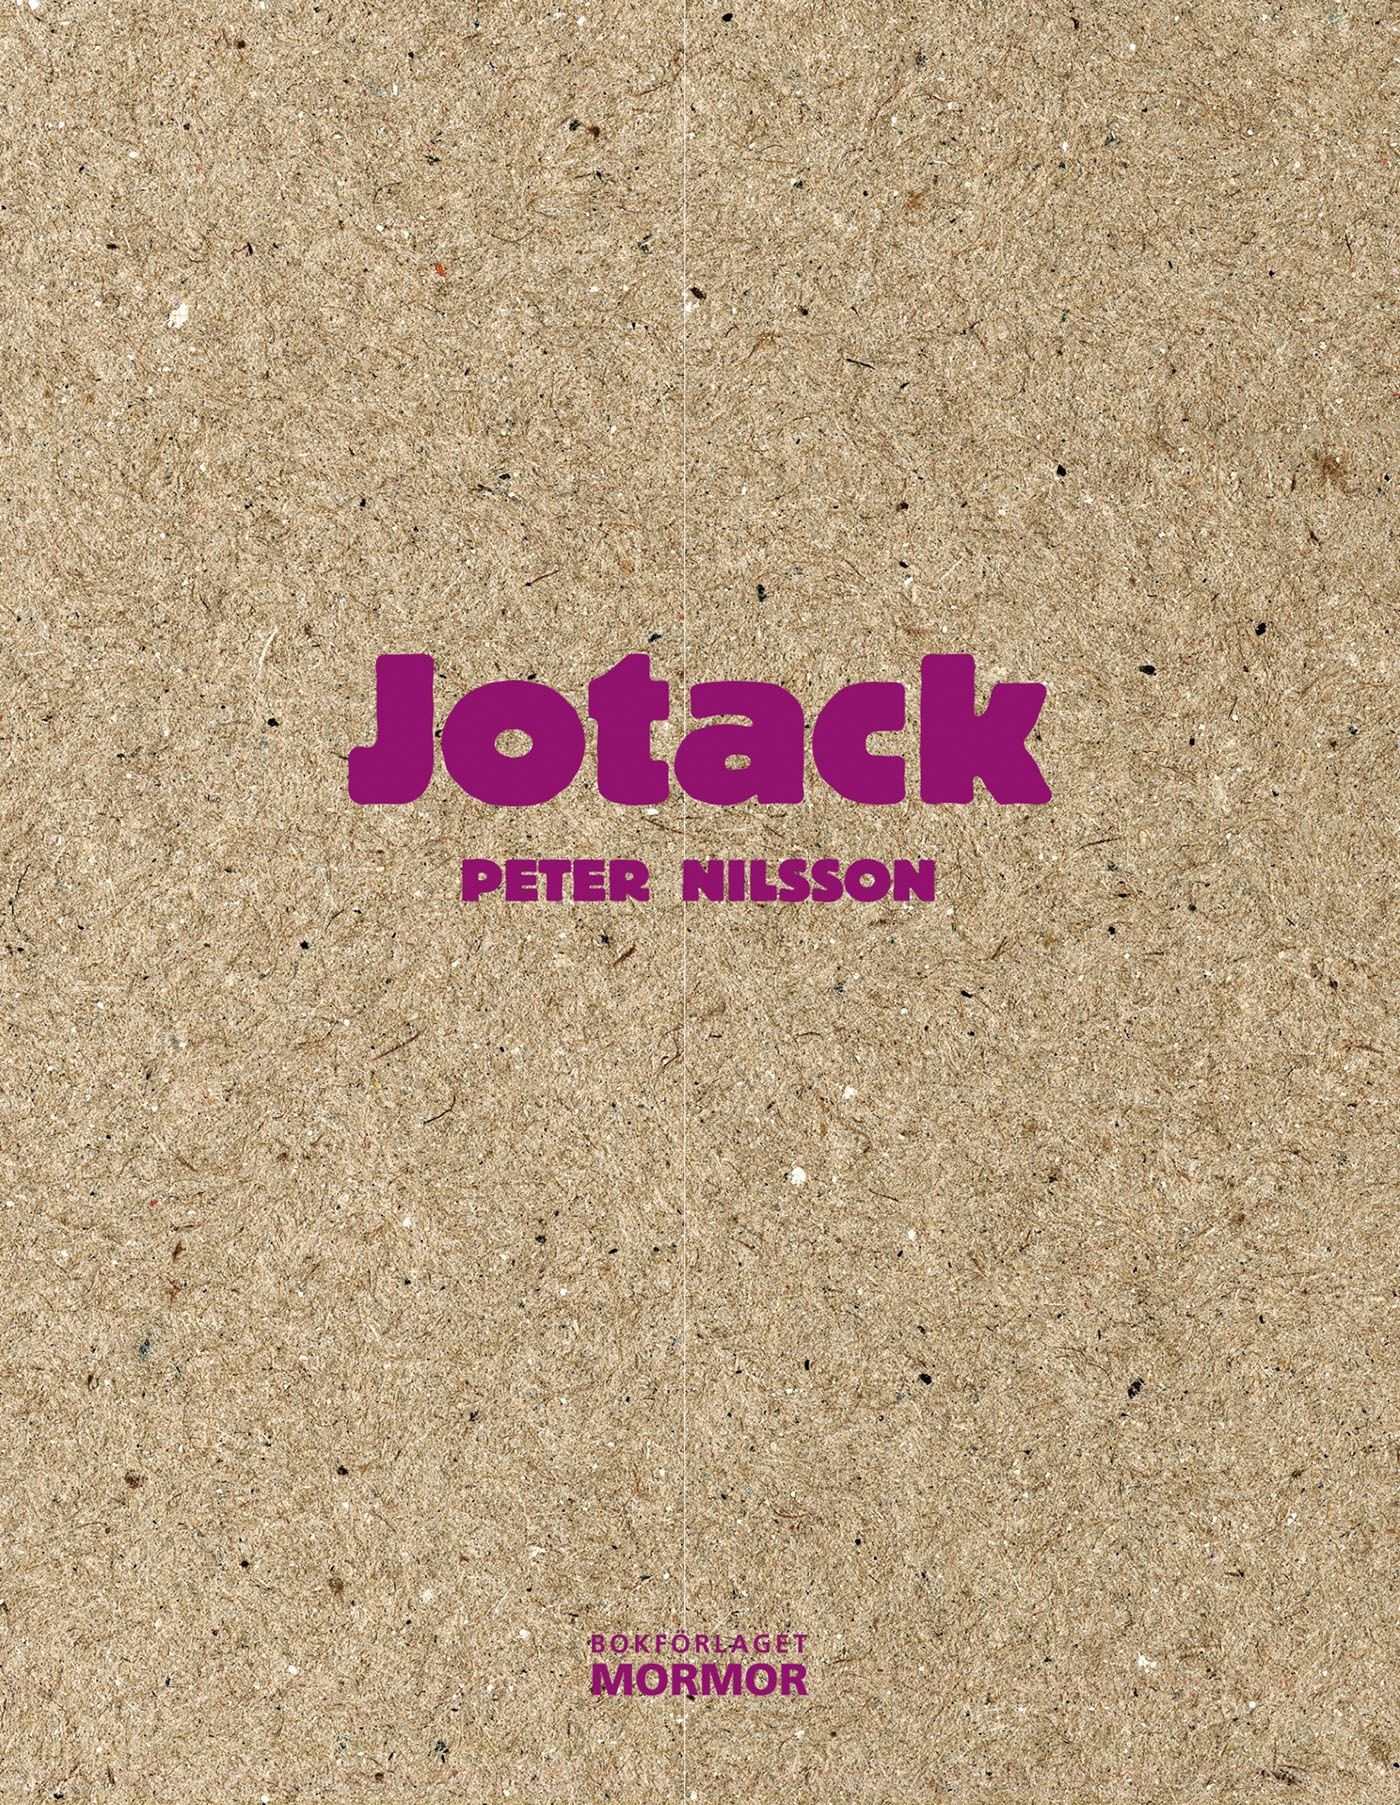 Jotack, eBook by Peter Nilsson